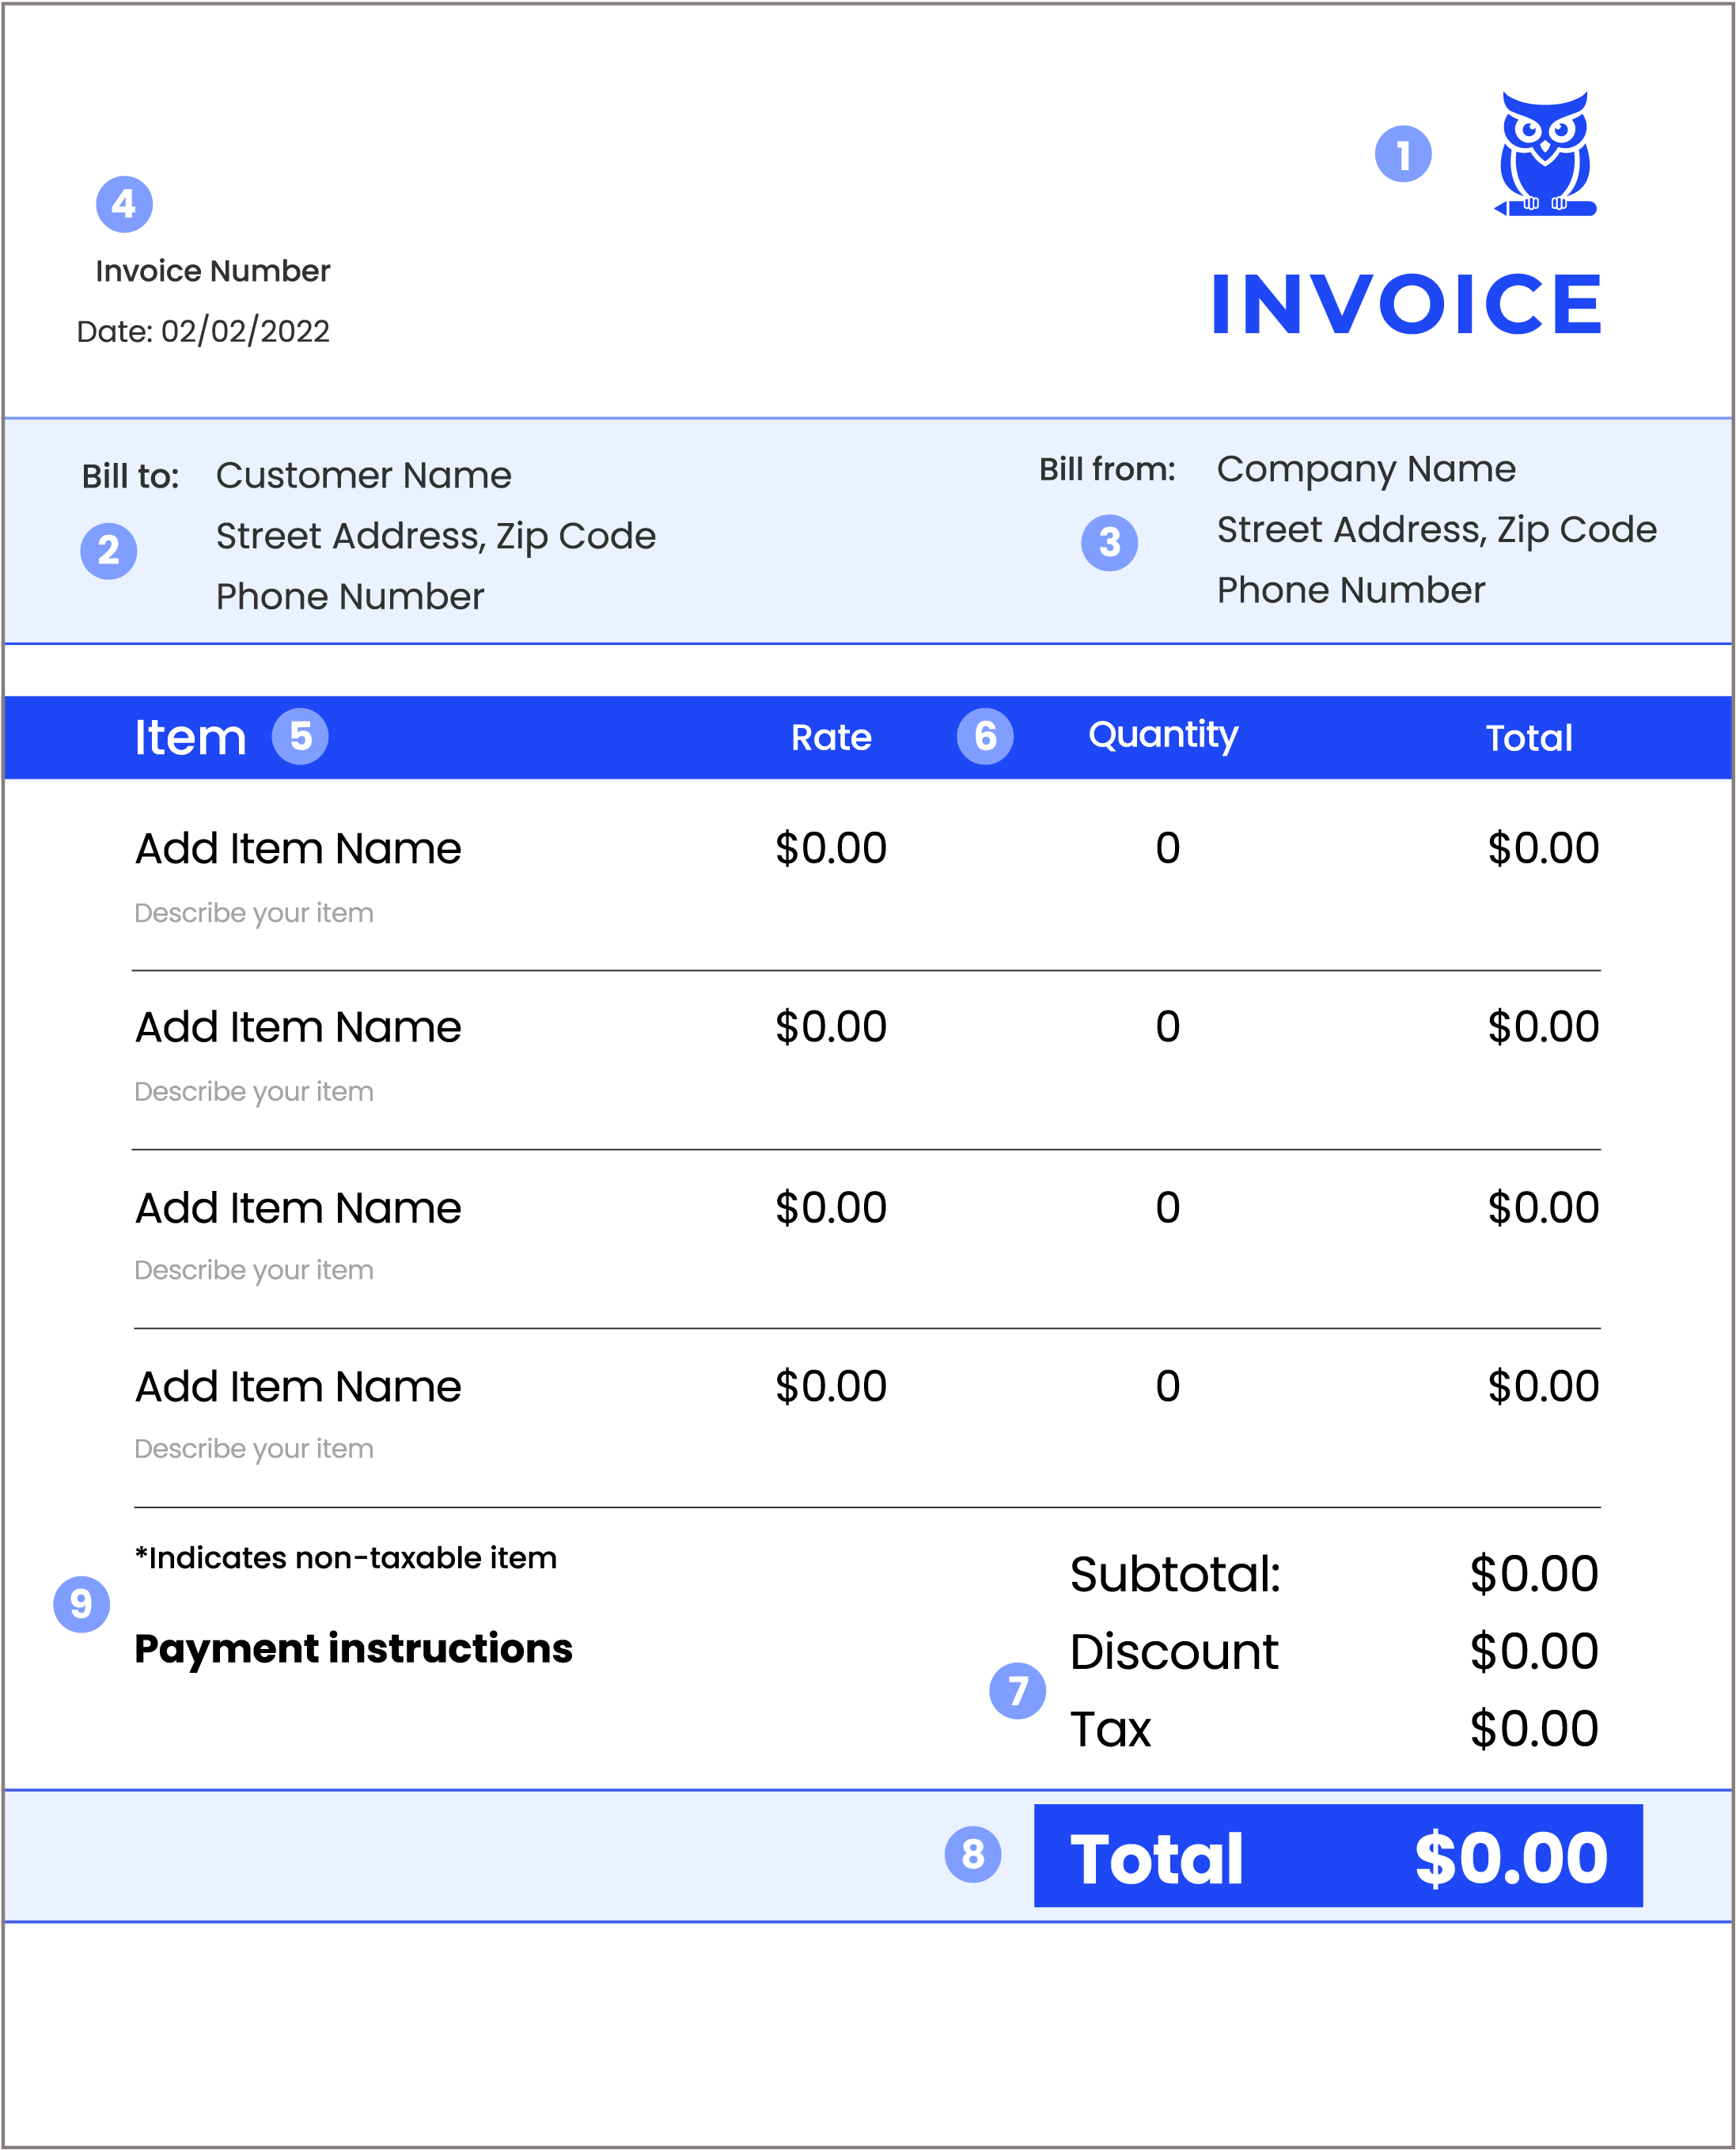 Essential elements of an online invoice generator